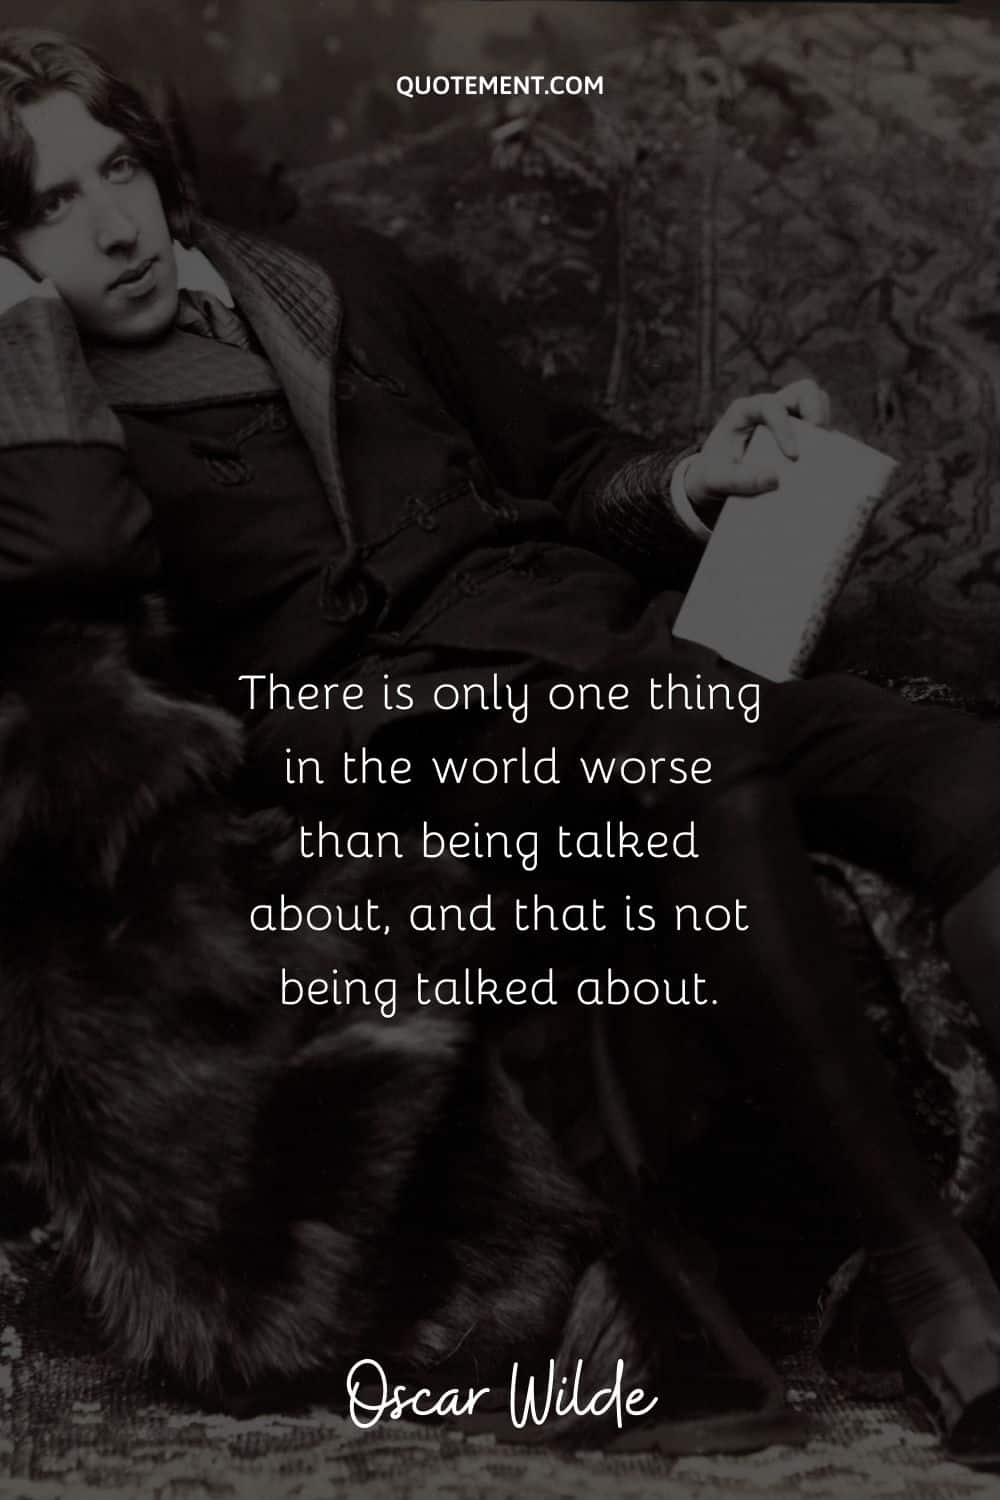 “There is only one thing in the world worse than being talked about, and that is not being talked about.” ― Oscar Wilde